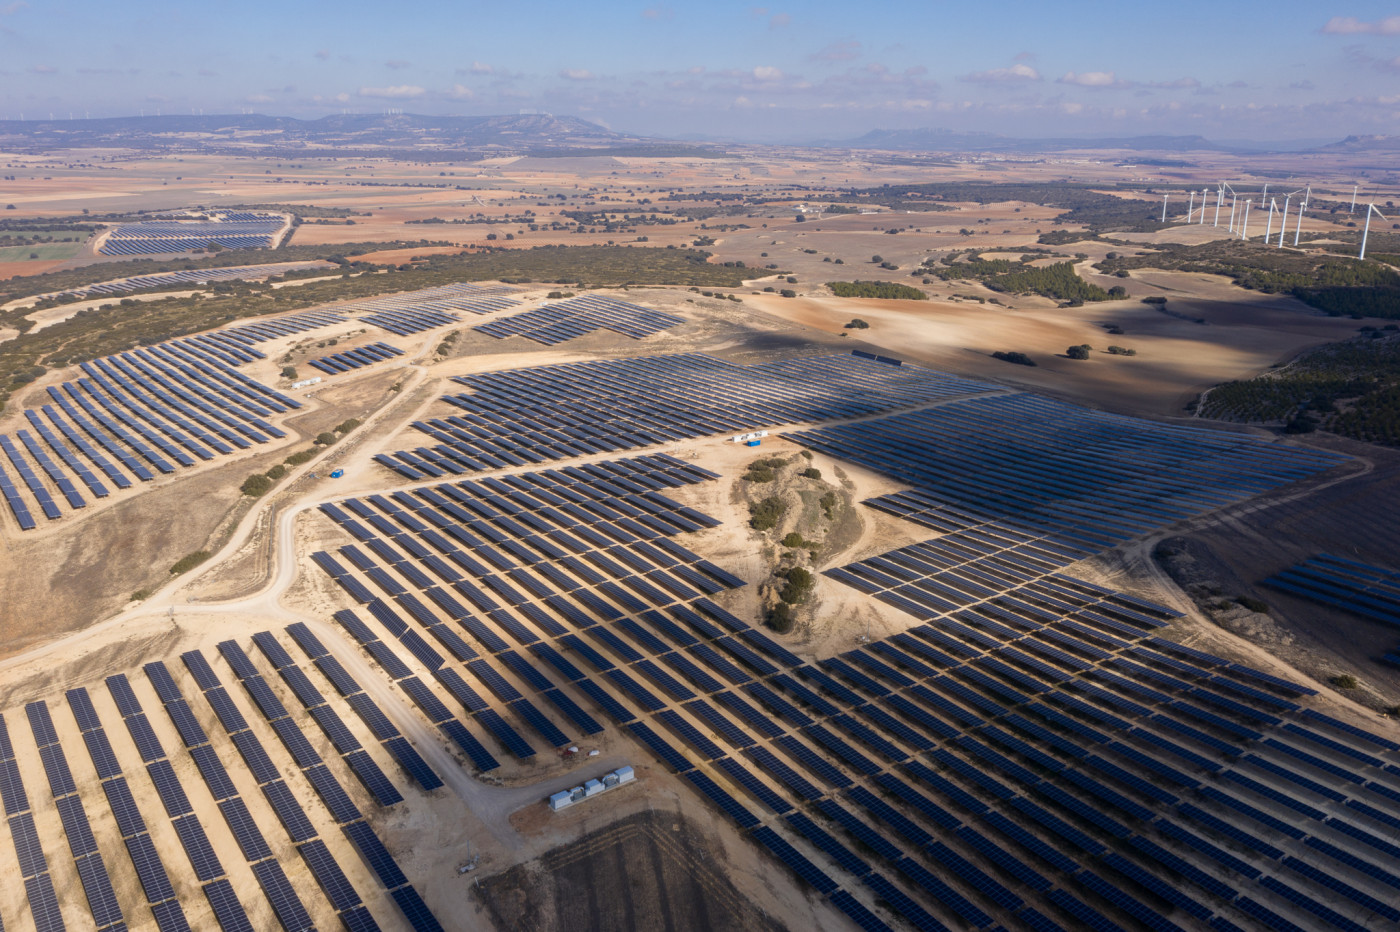 The five photovoltaic plants built by Eiffage Energía Sistemas in Albacete are already in operation